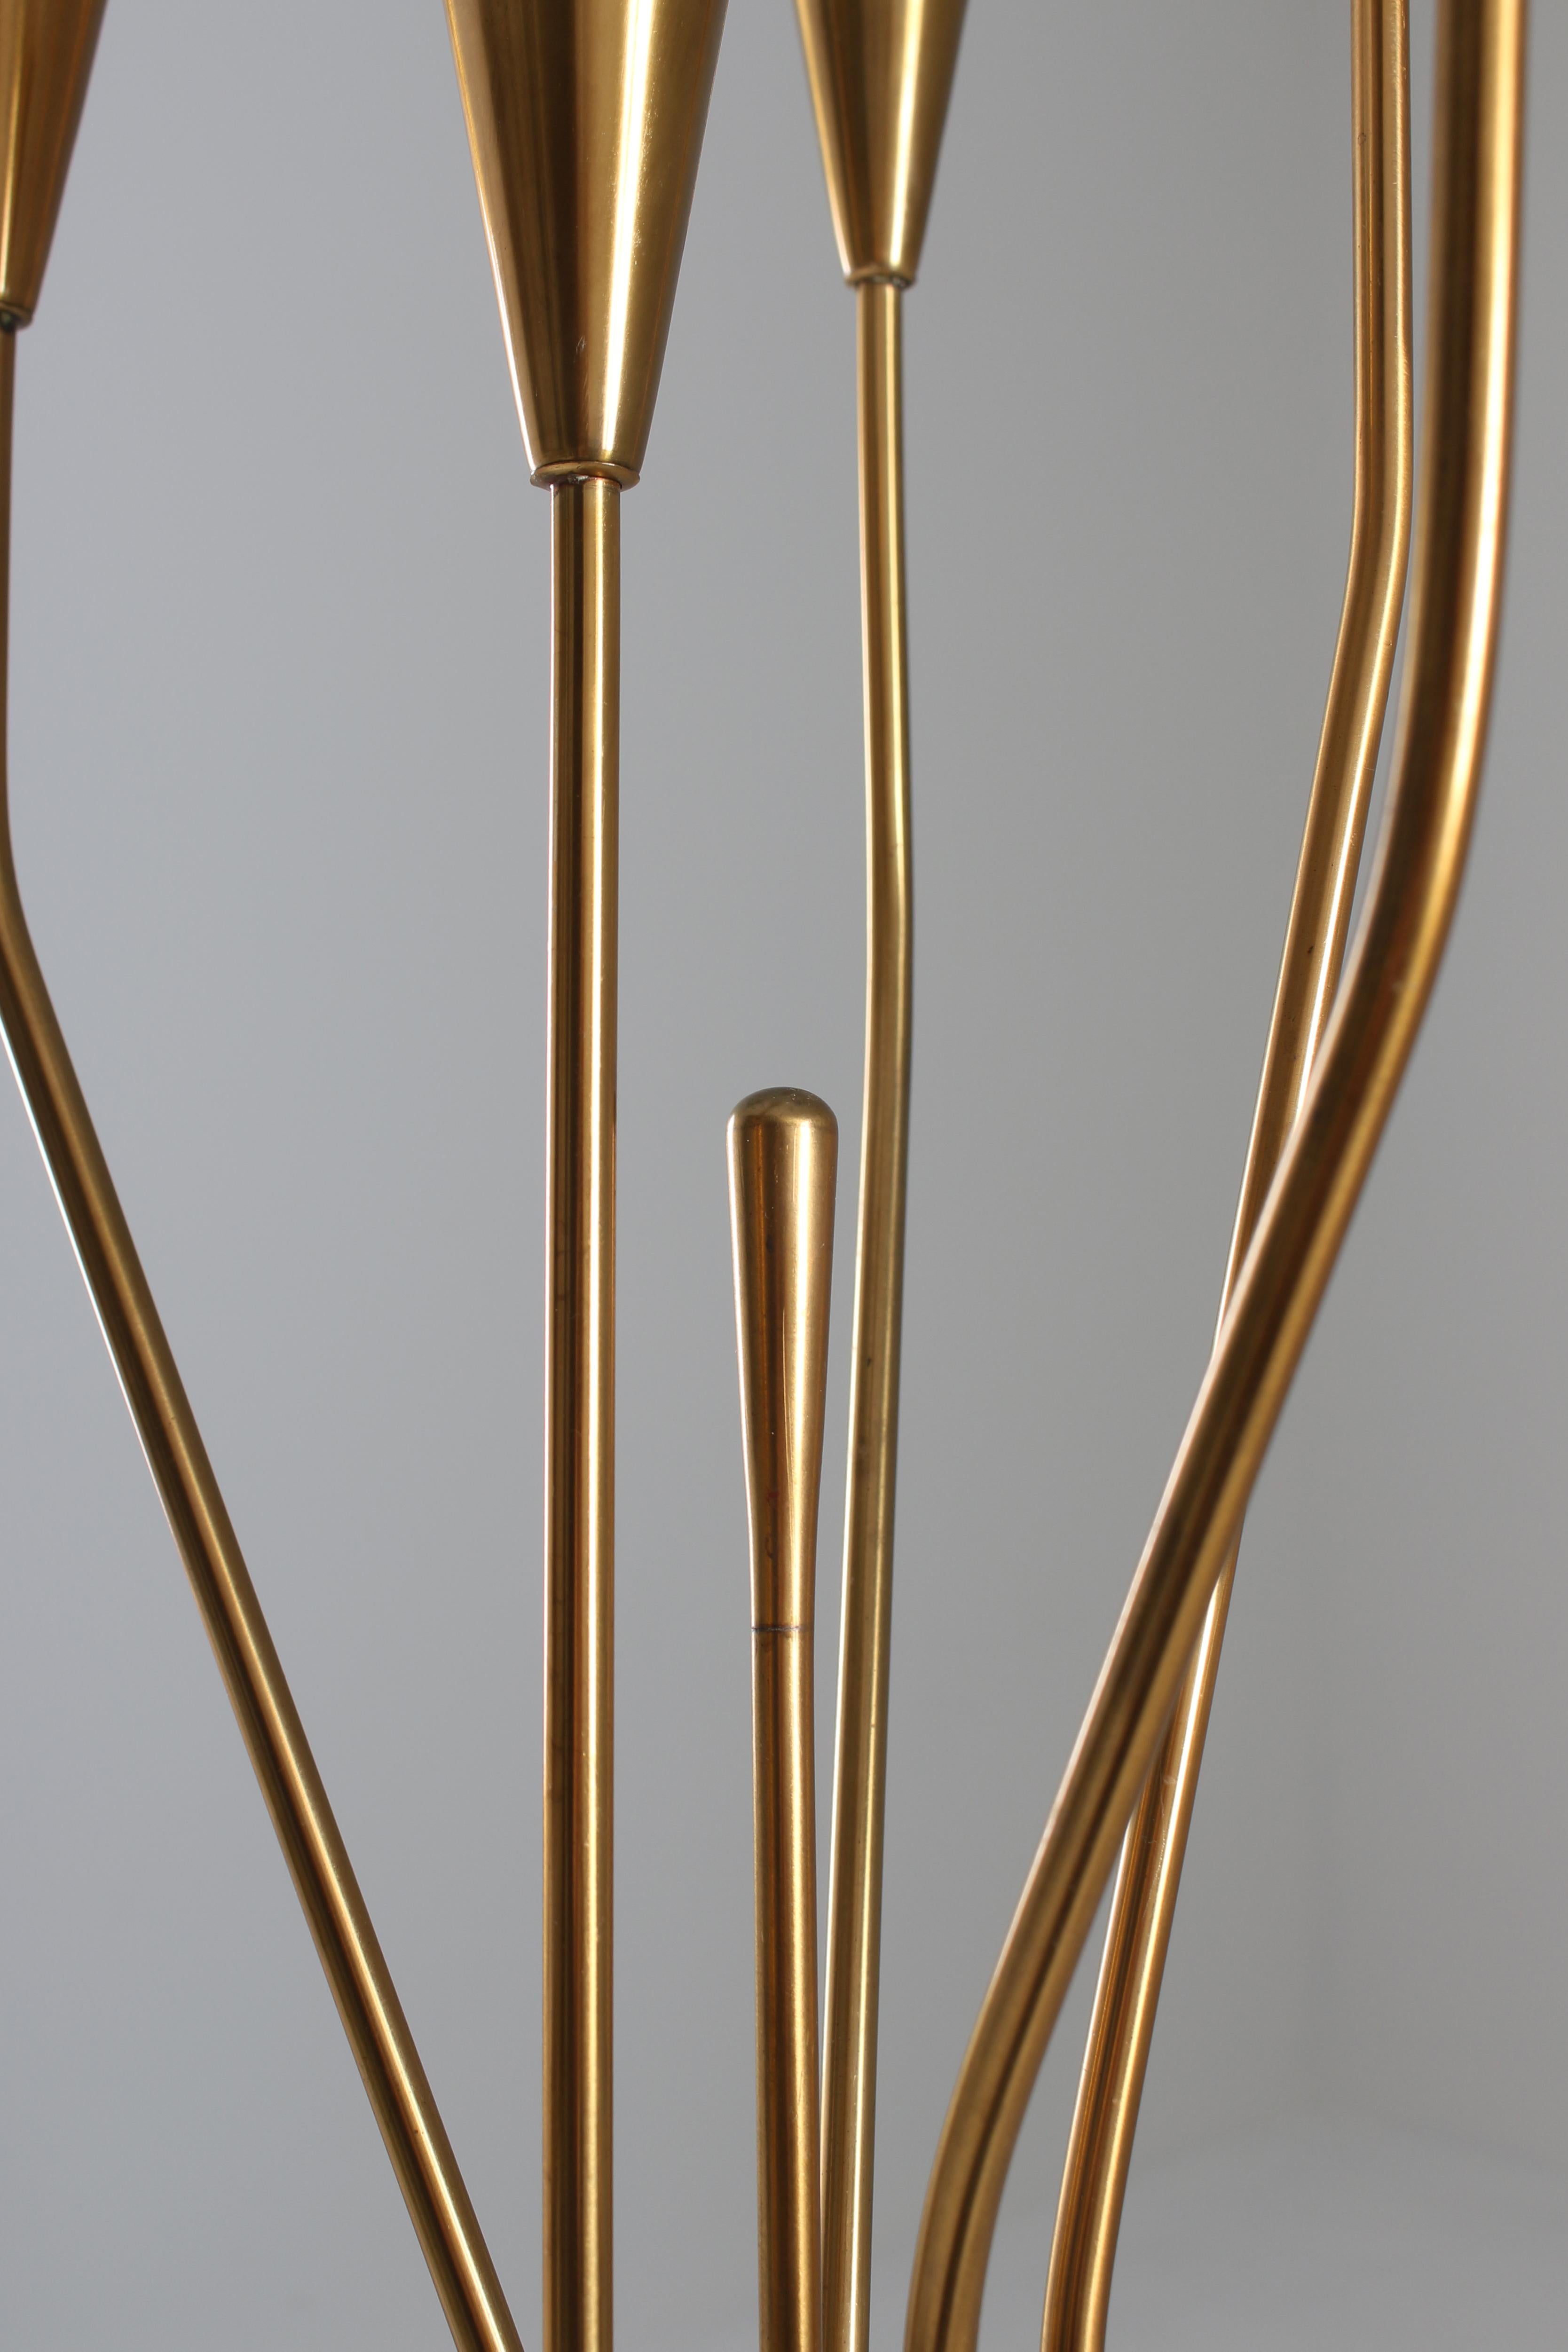 Swedish Floor Lamp in Brass and Opaline Glass by Böhlmarks, 1950s For Sale 2